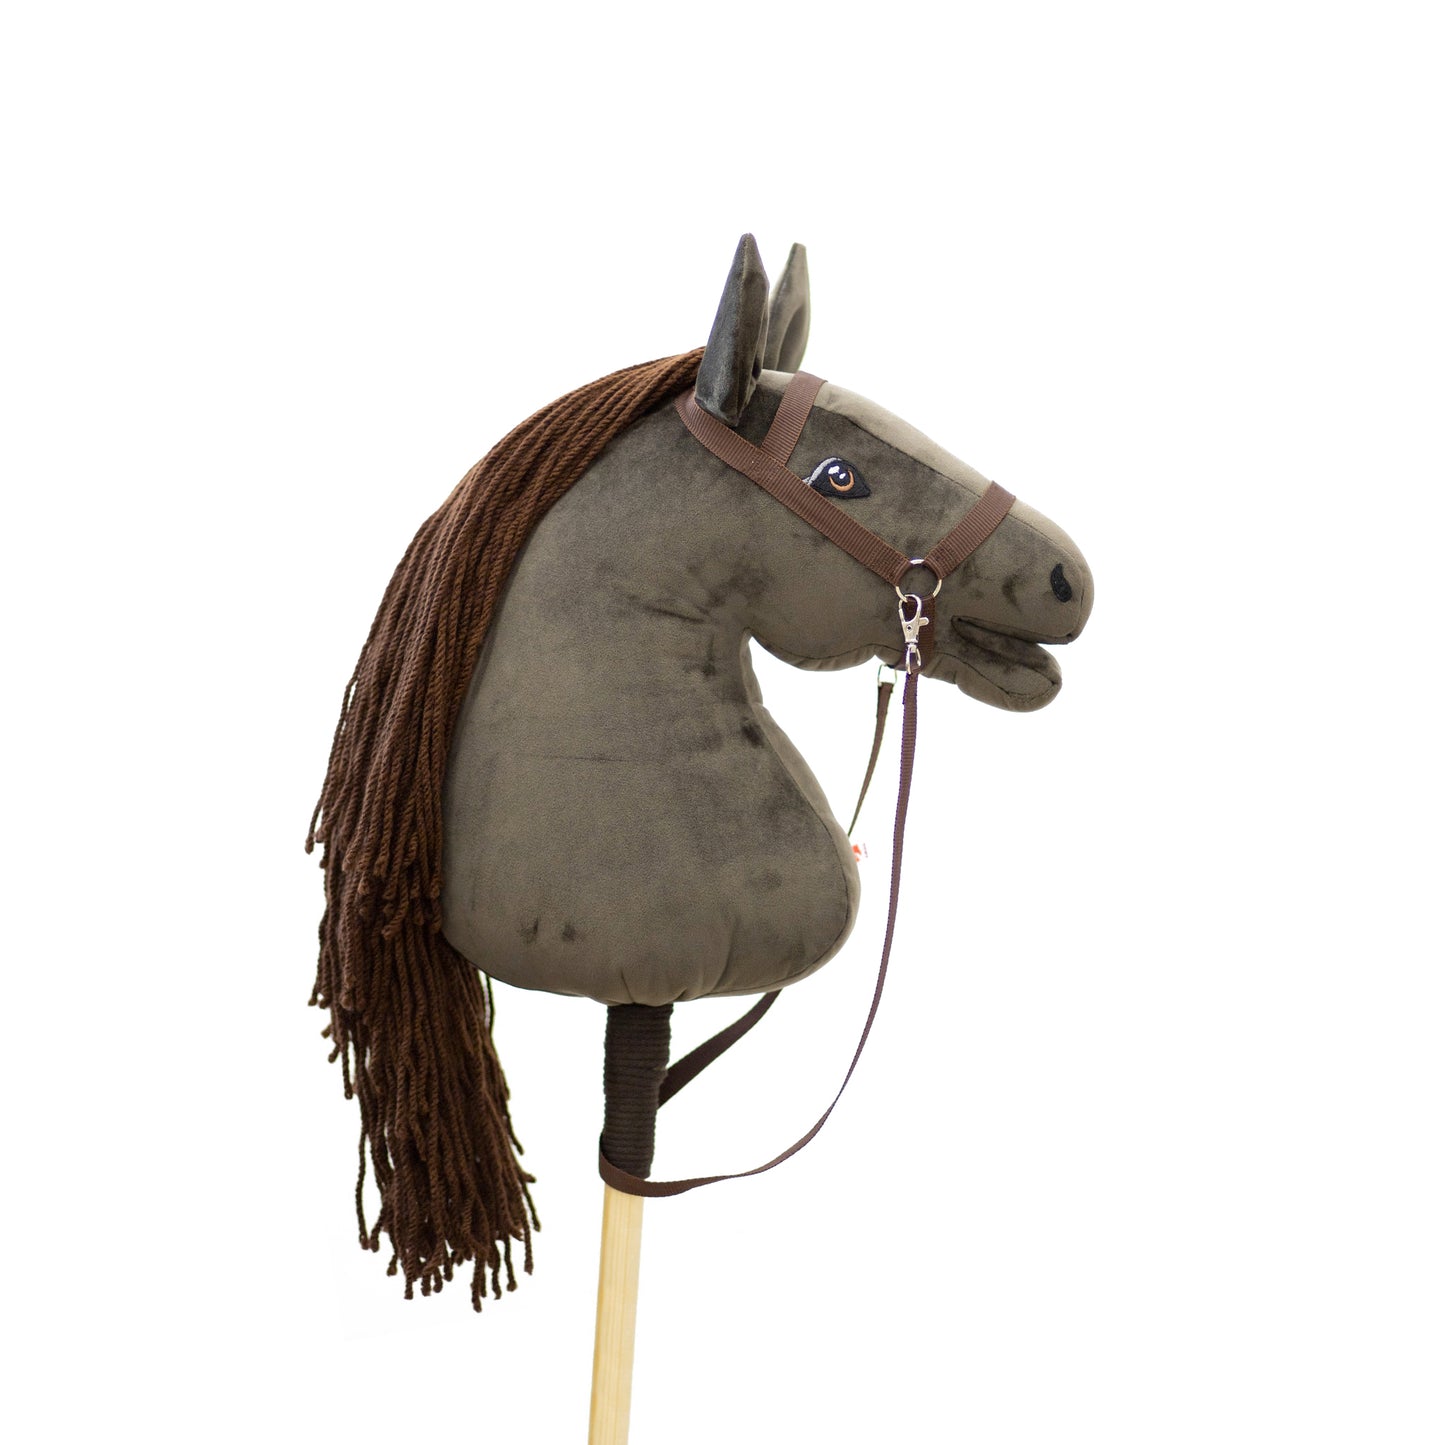 Gizmo - Brown mane - Adult horse